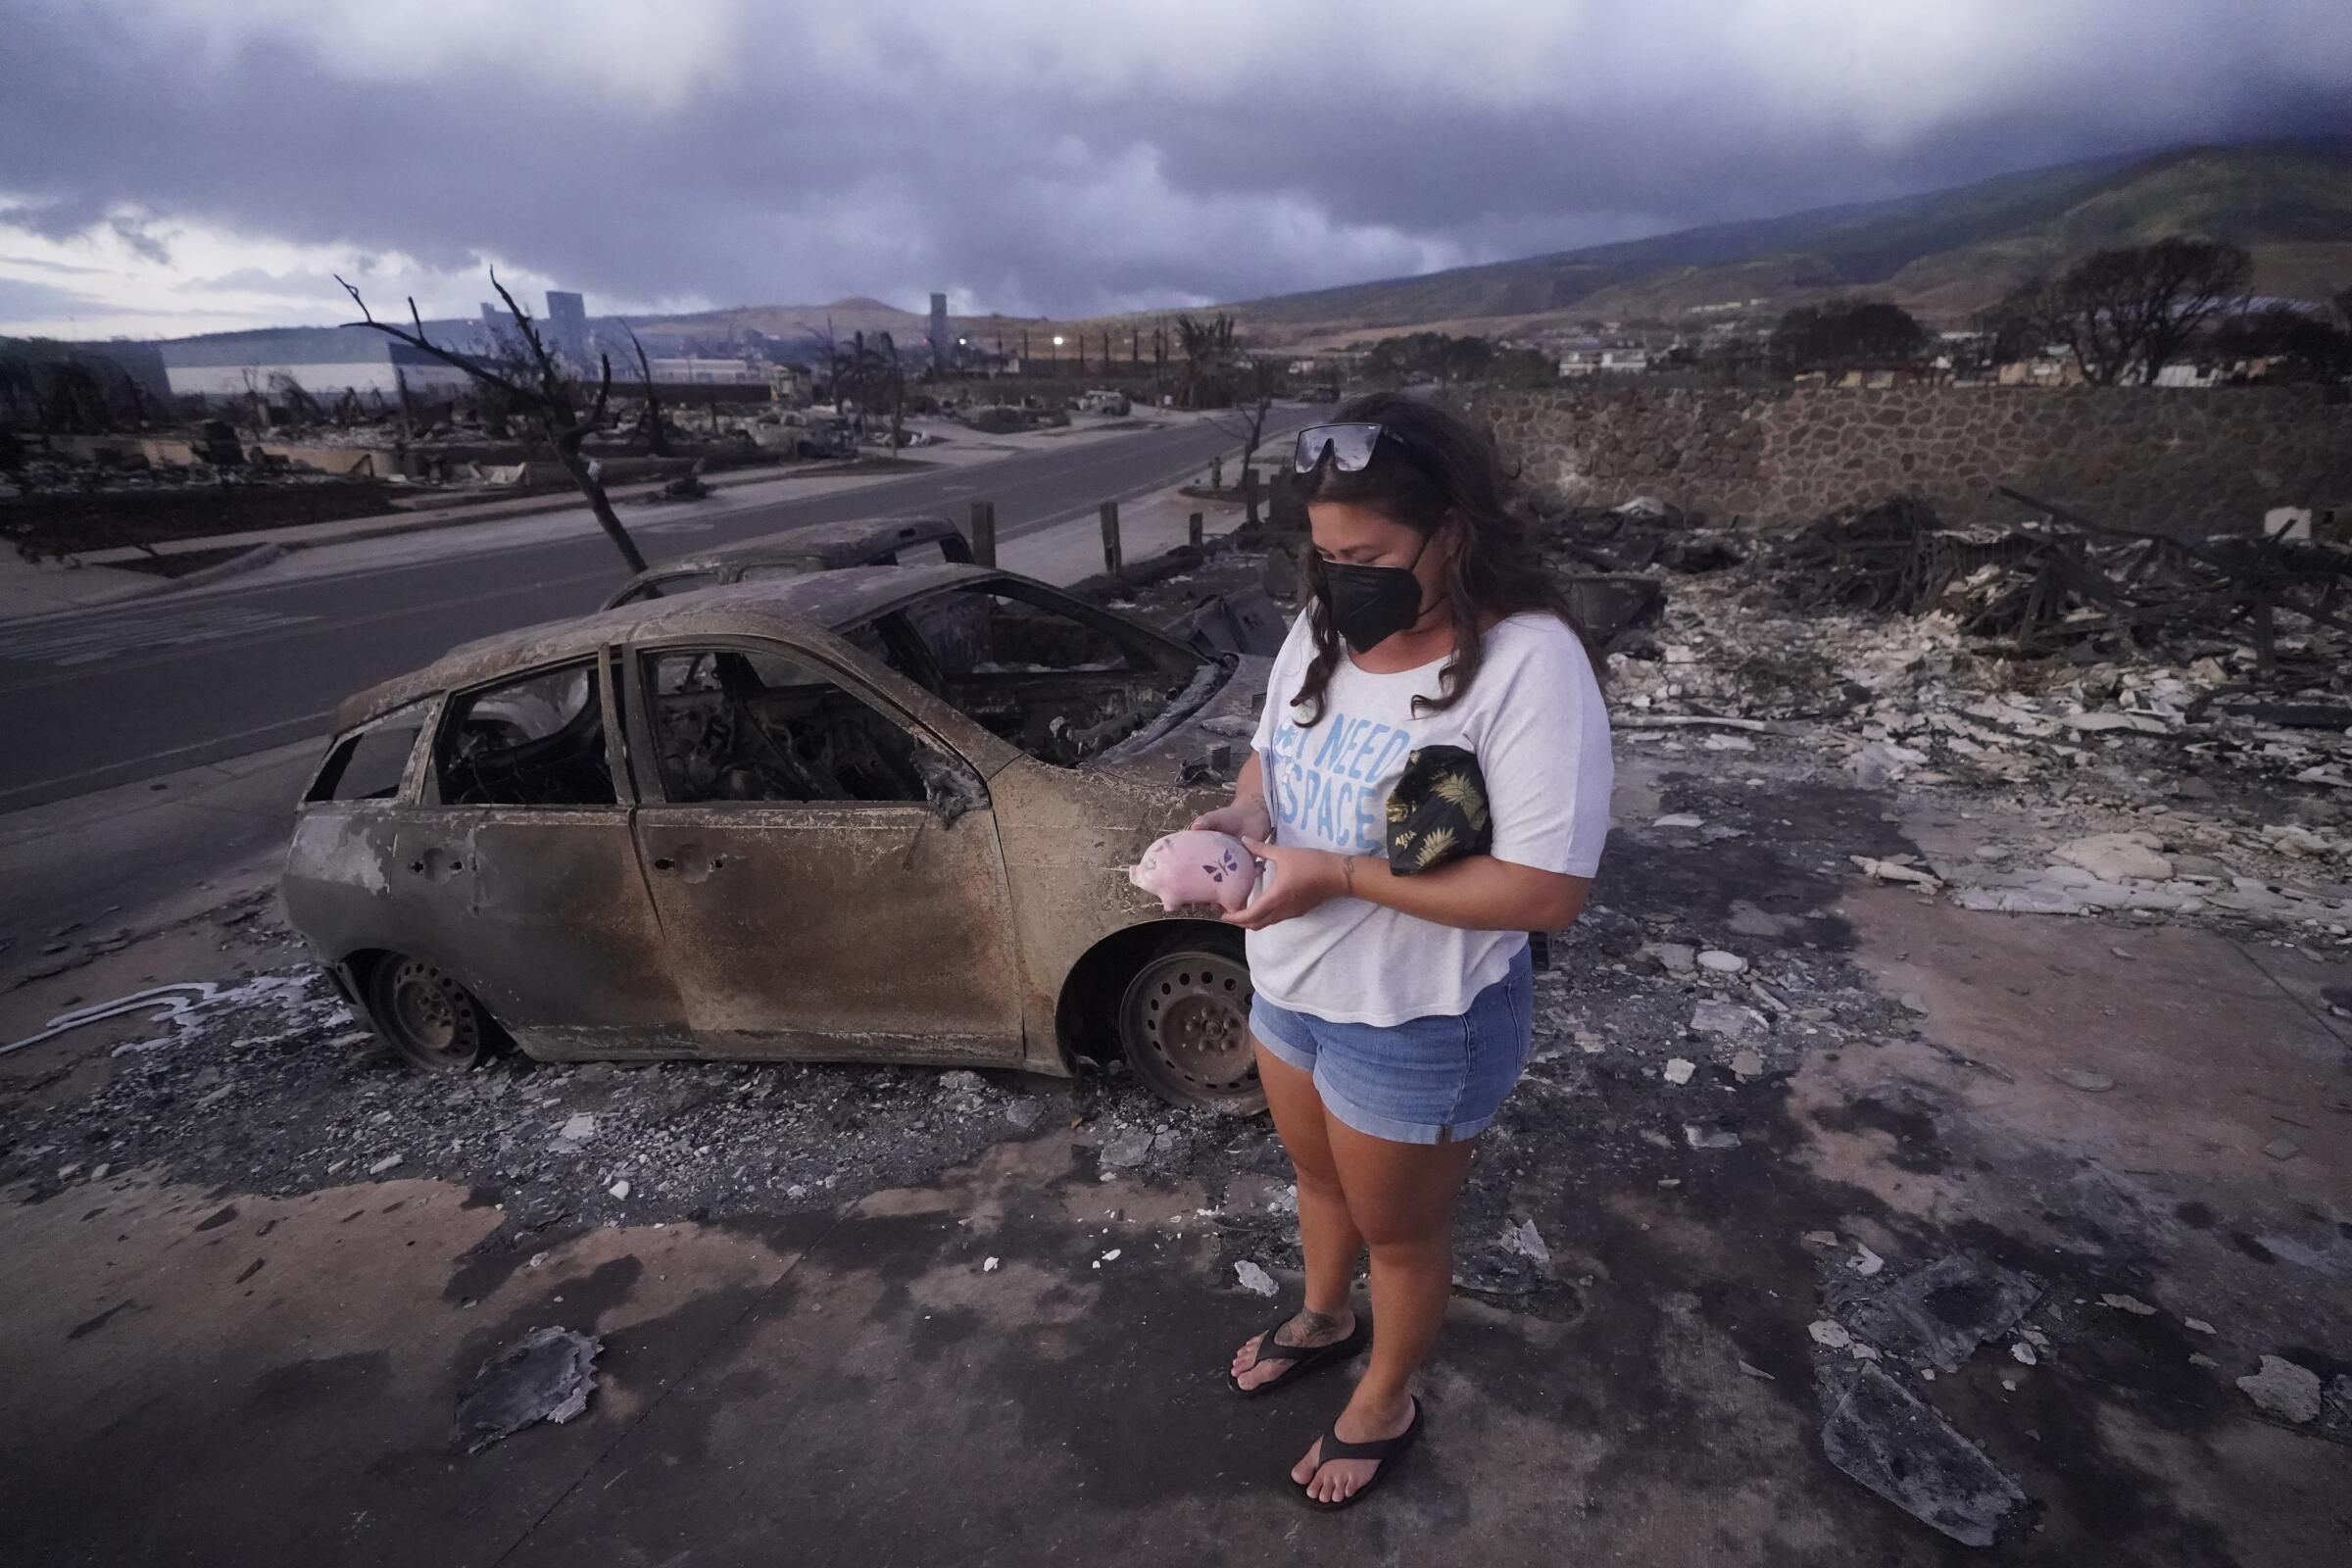 A woman stands in a smoky ruin holding a small pink piggy bank.